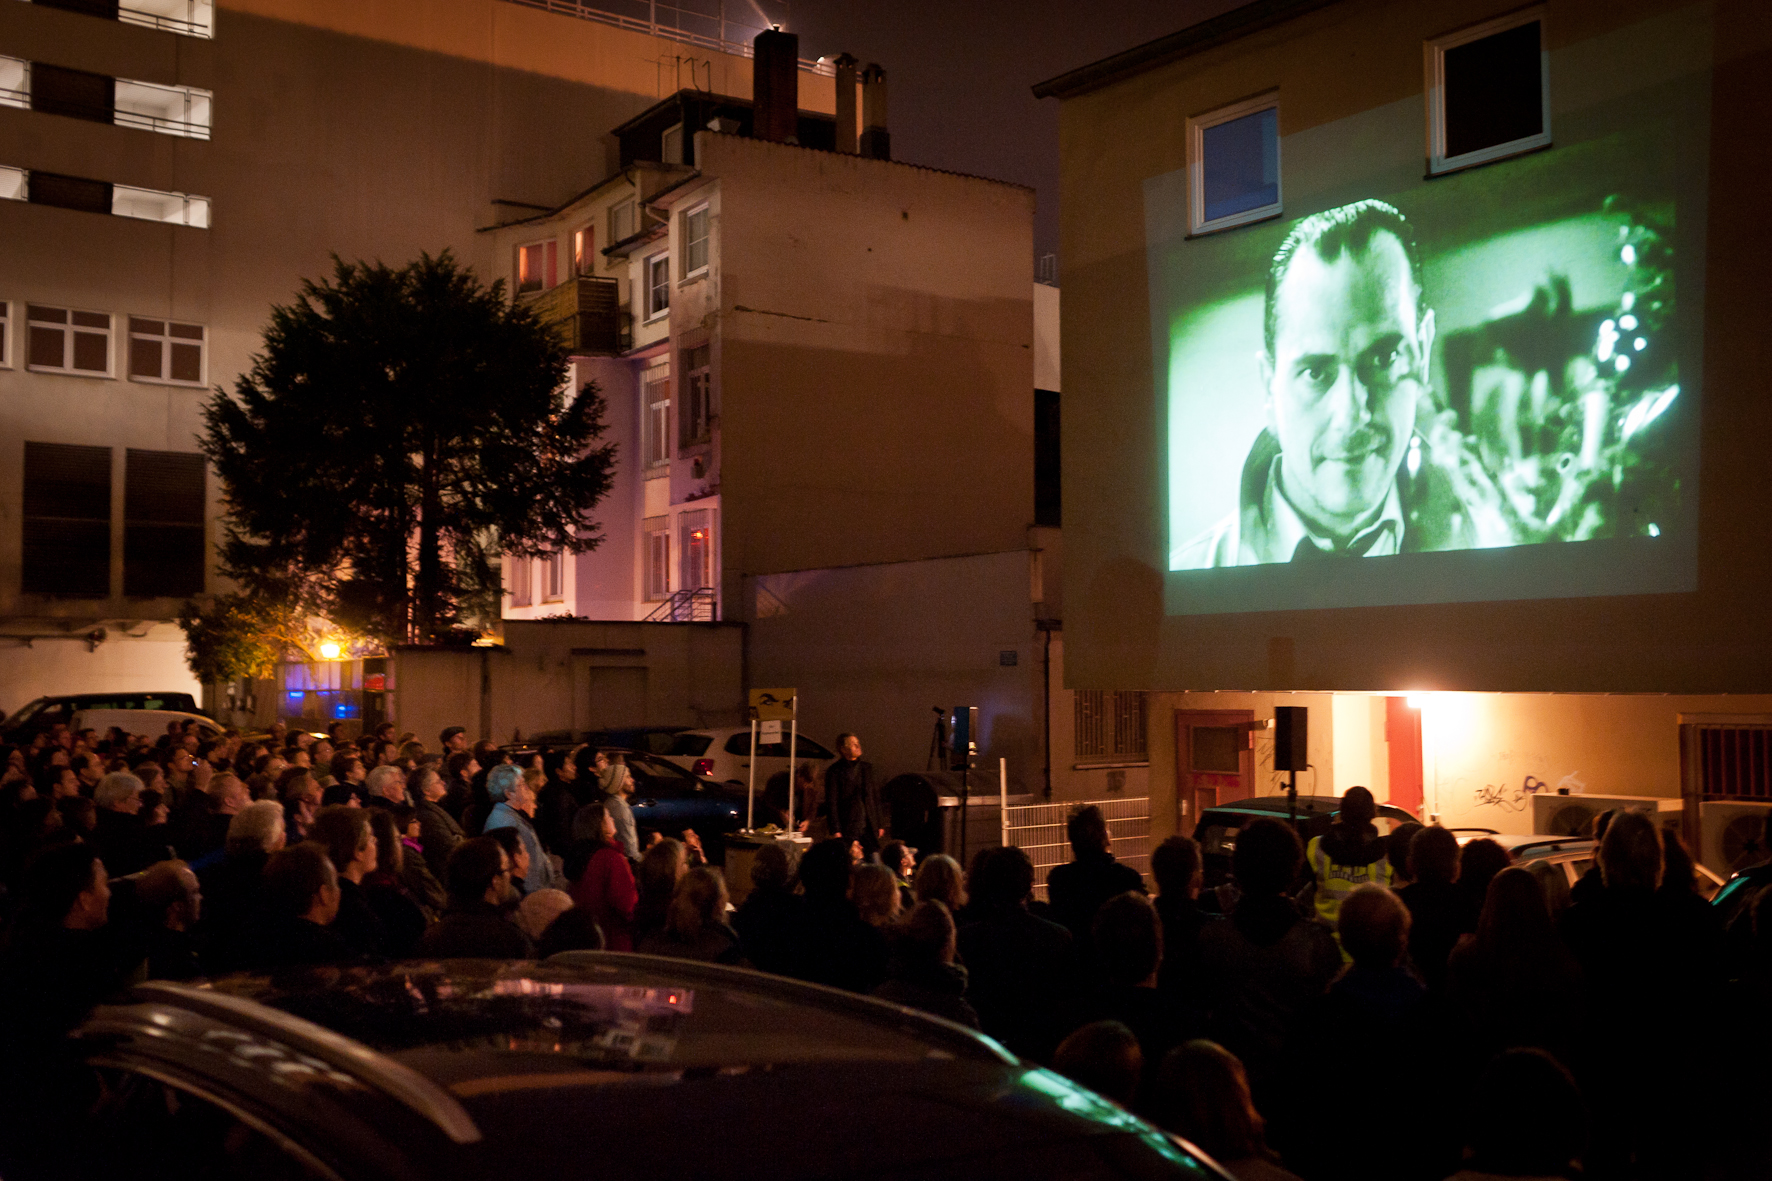 Films will be shown on a range of impromptu 'screens' around St Helier.